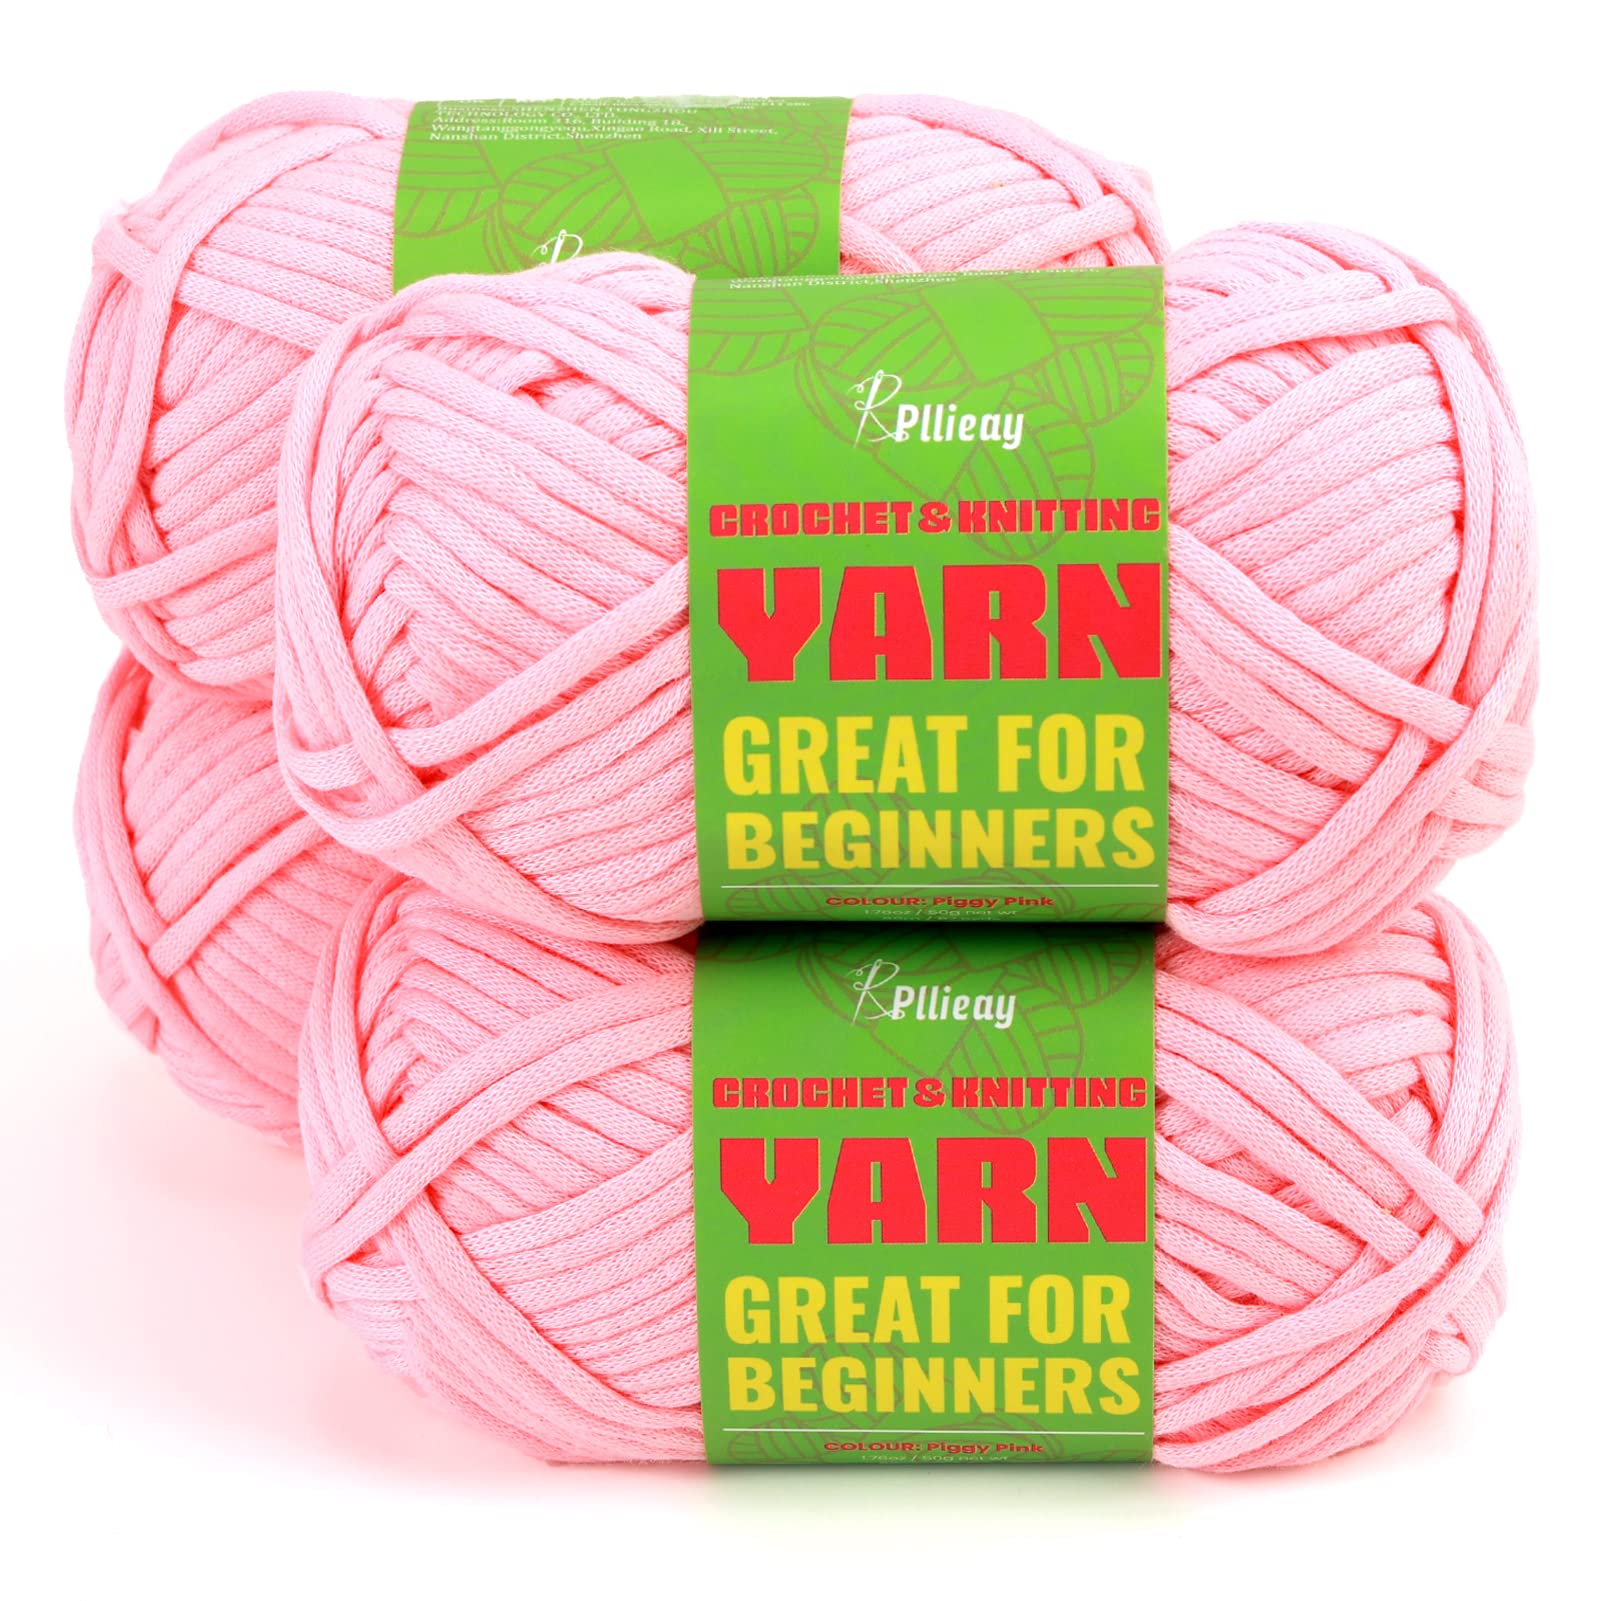  Pllieay Snowy White Cotton Yarn for Crocheting and Knitting, 4  Pack Crochet Yarn for Beginners with Easy-to-See Stitches, Cotton-Nylon  Blend Yarn for Beginners Crochet Kit Making